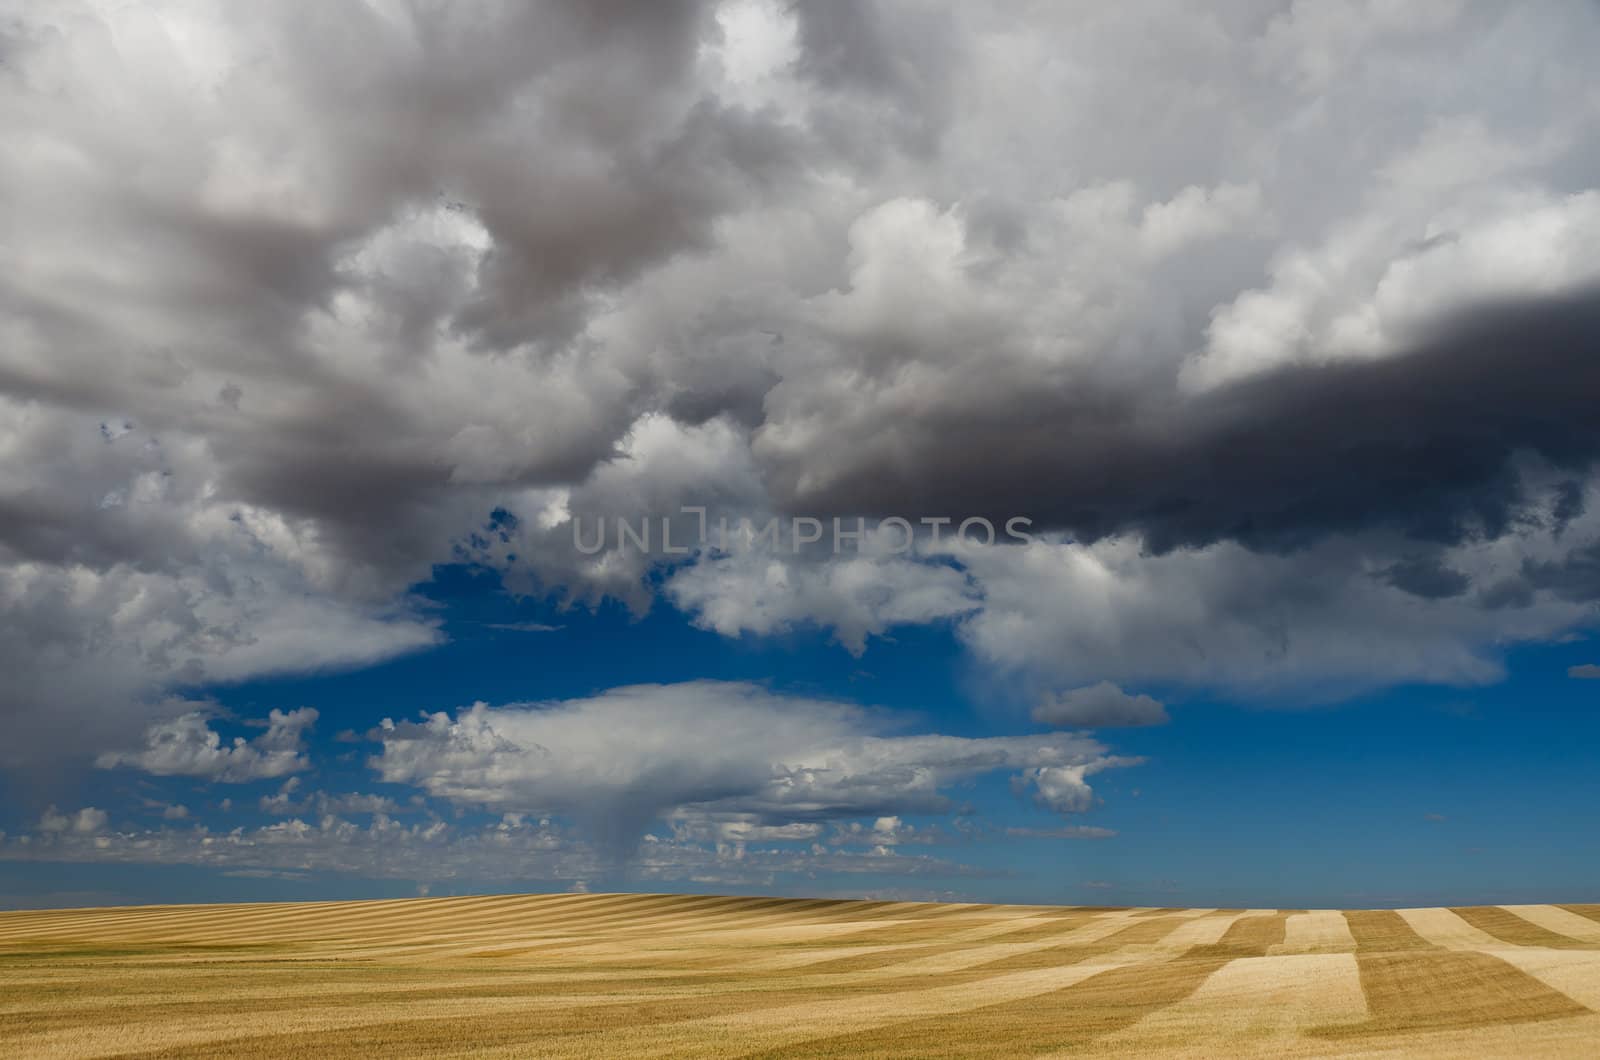 Striped fields of wheat chaff and clouds, Teton County, Idaho, USA by CharlesBolin